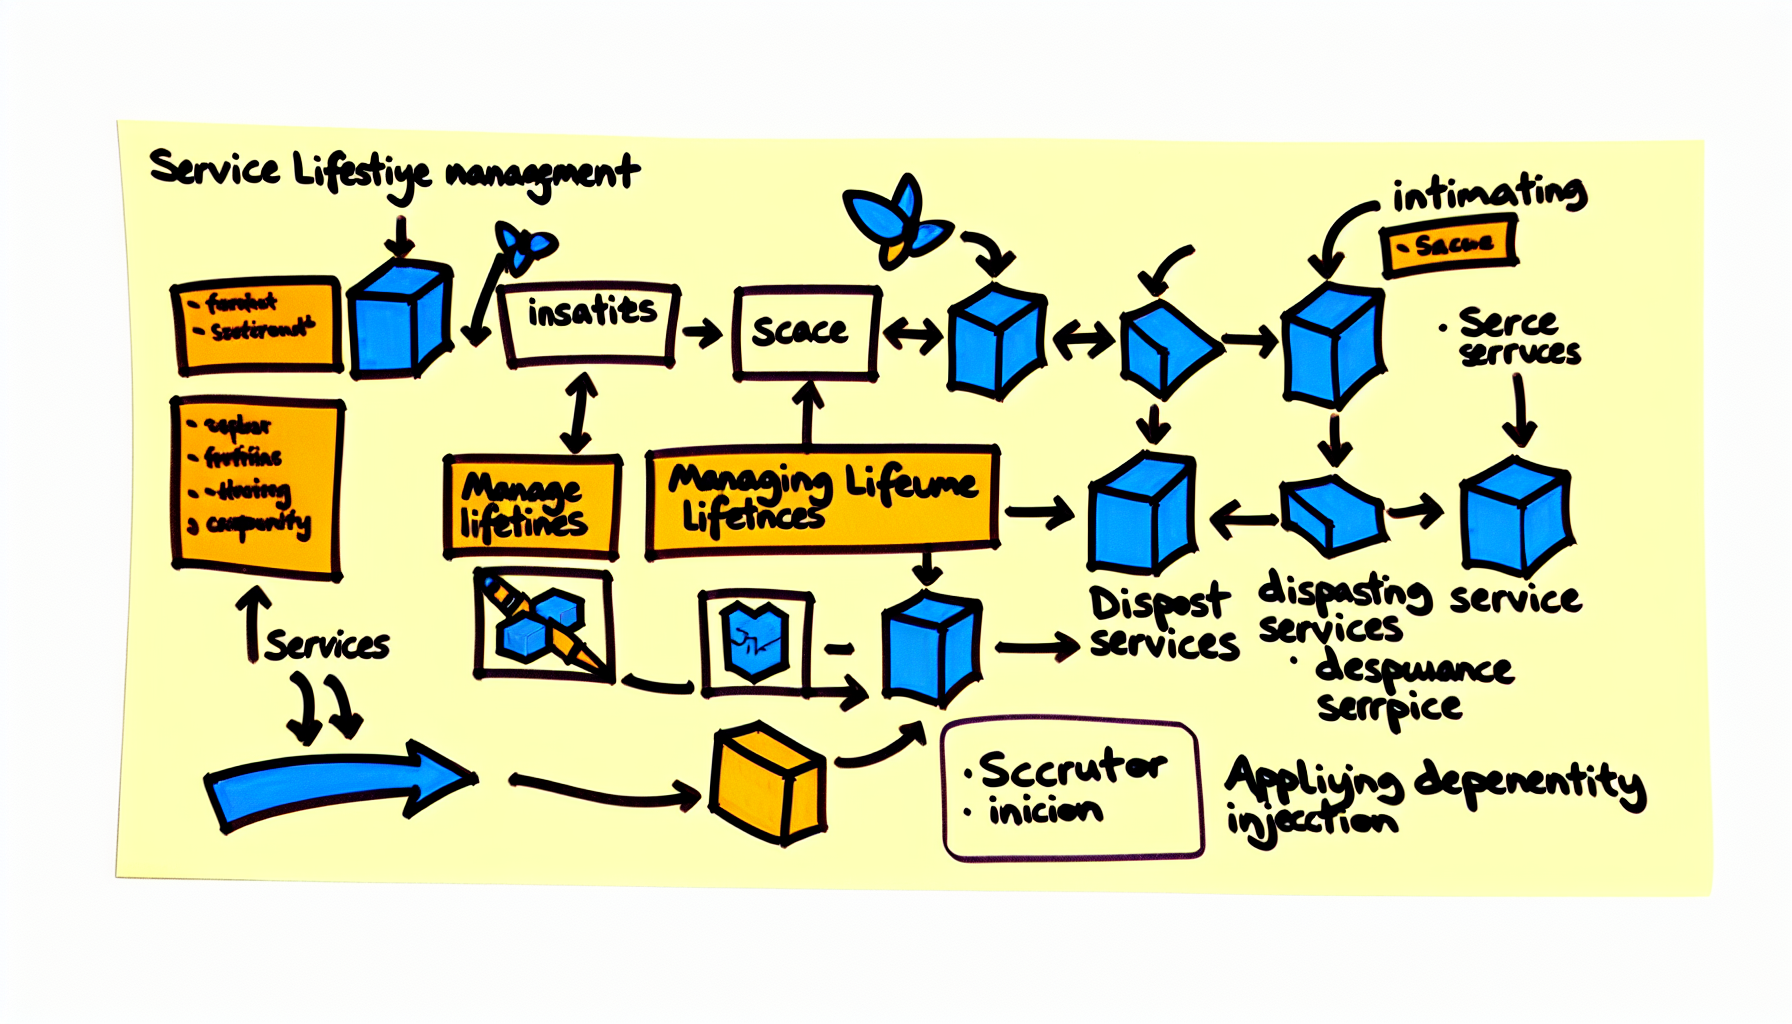 A visual diagram of service lifetime management with Scrutor